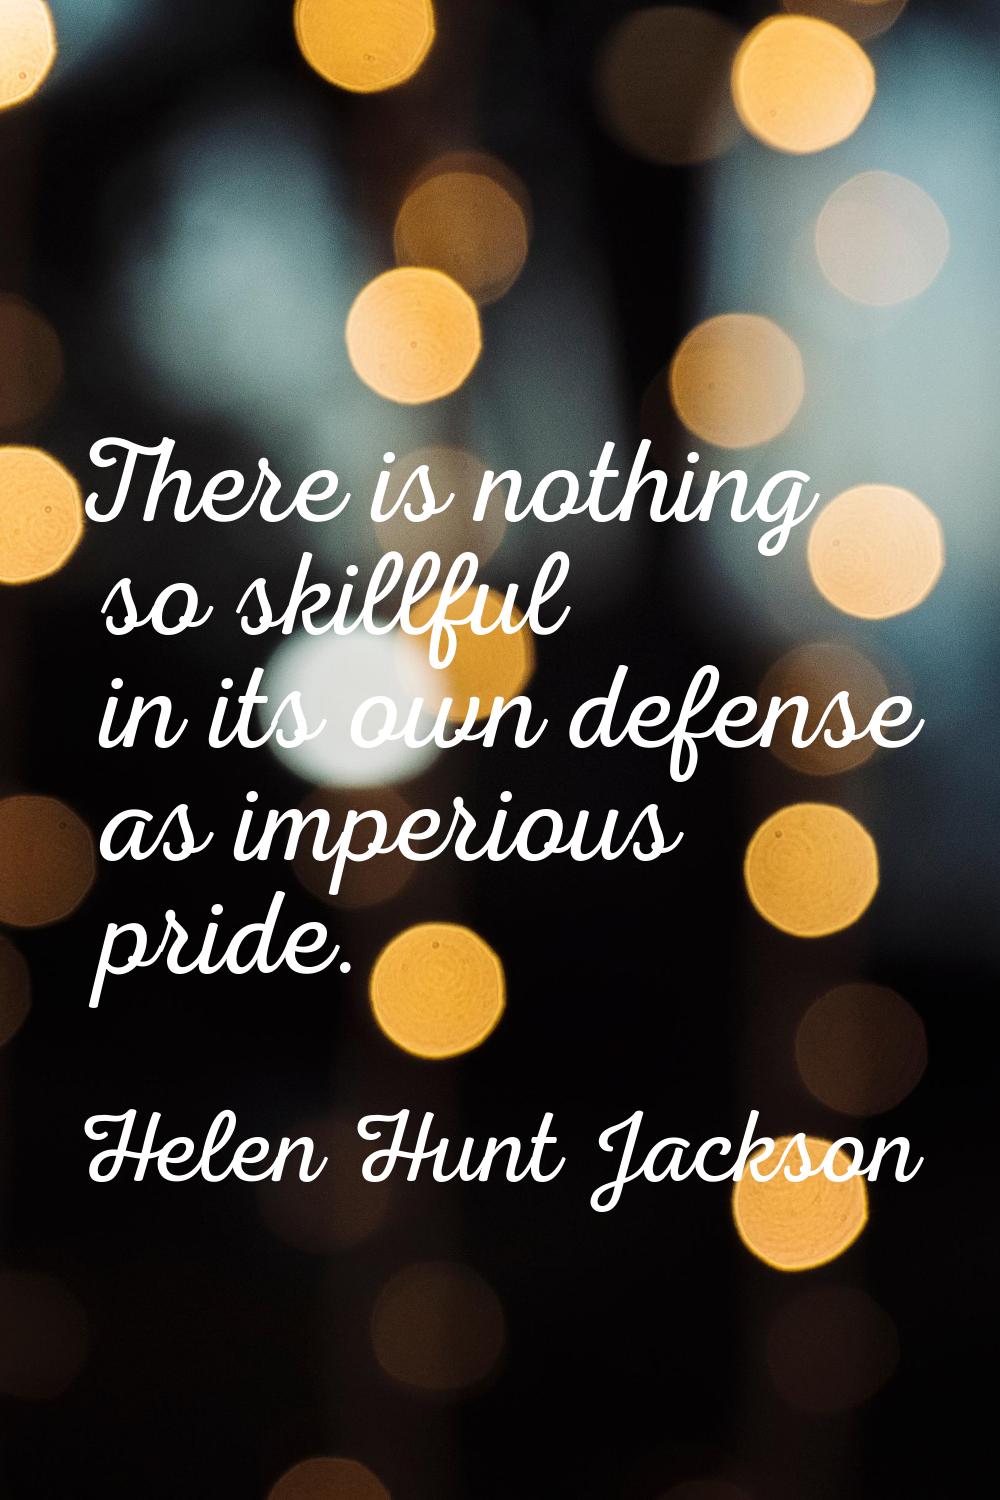 There is nothing so skillful in its own defense as imperious pride.